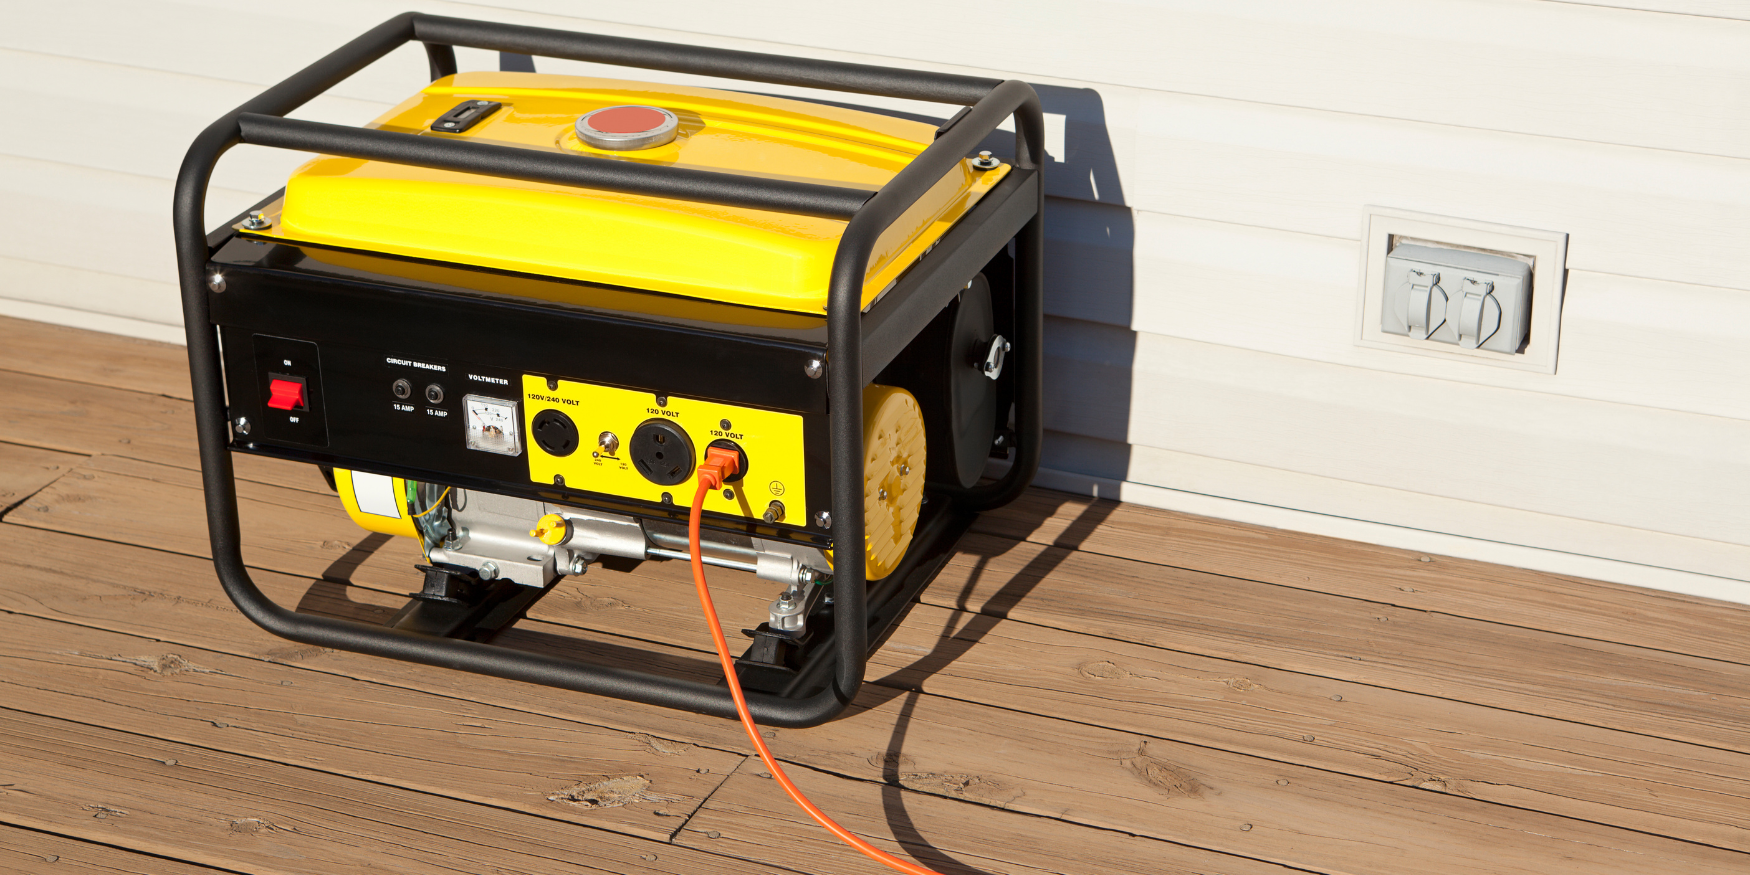 The Crucial Overview of Picking a Home Back-up Generator